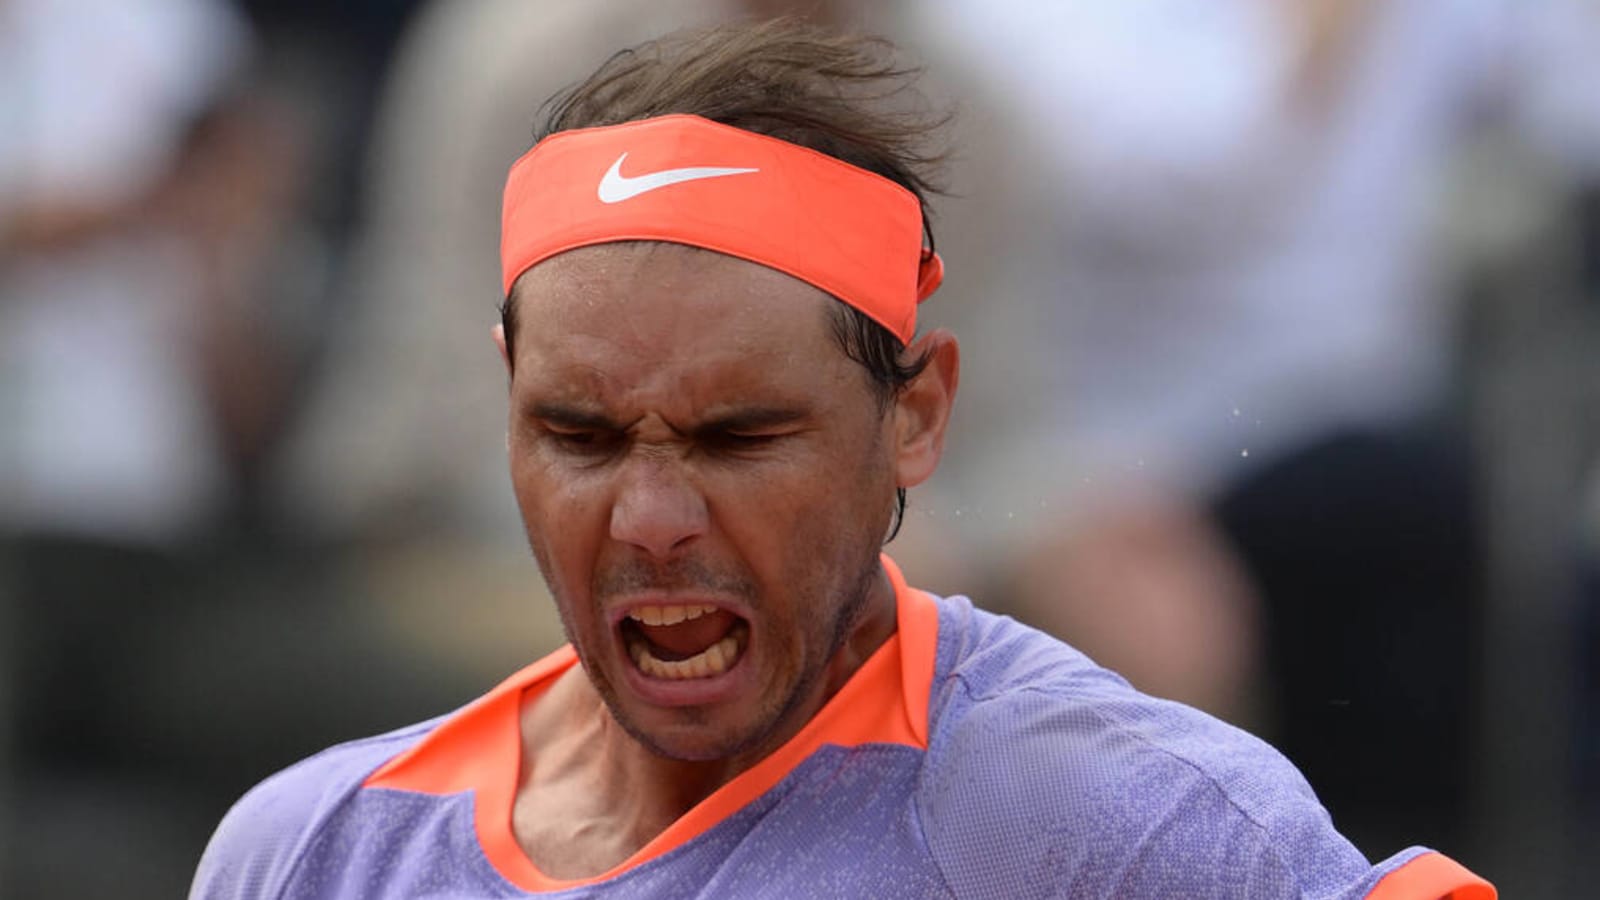 'It’s living the dream,' Zizou Bergs explains how special it was to play Rafael Nadal as he loses to him in the first round of Italian Open